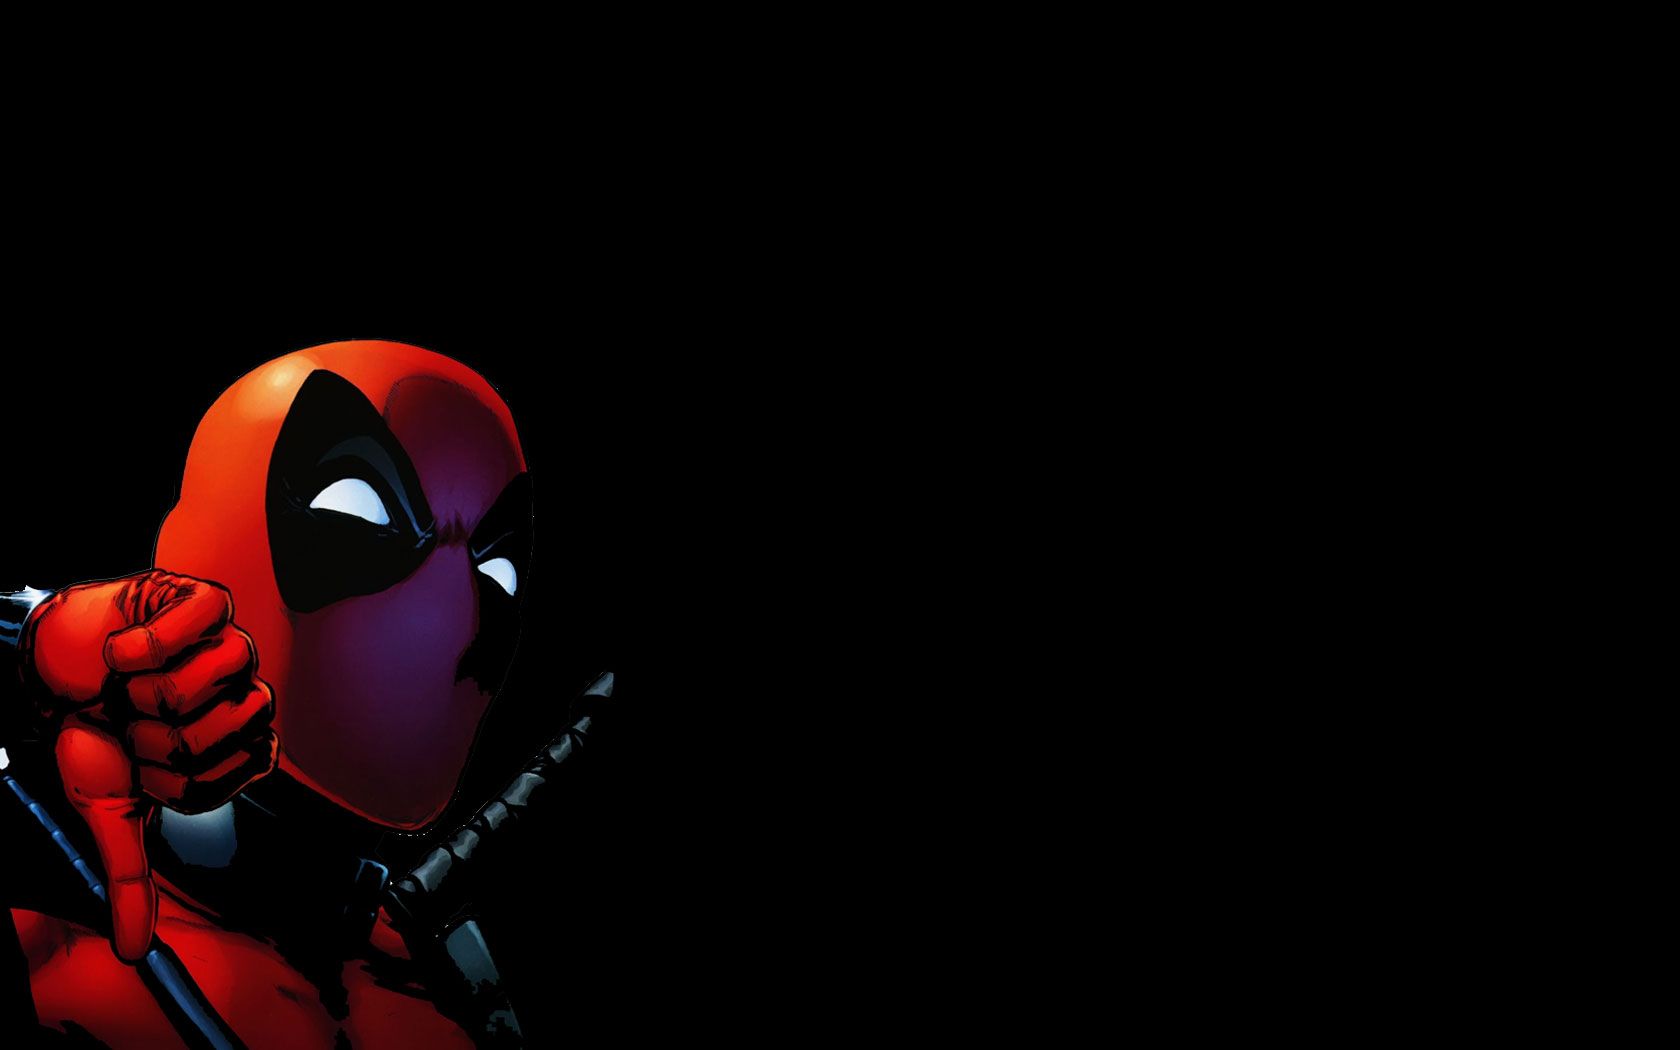 Deadpool Wallpaper For Android - Deadpool Disapproves - HD Wallpaper 